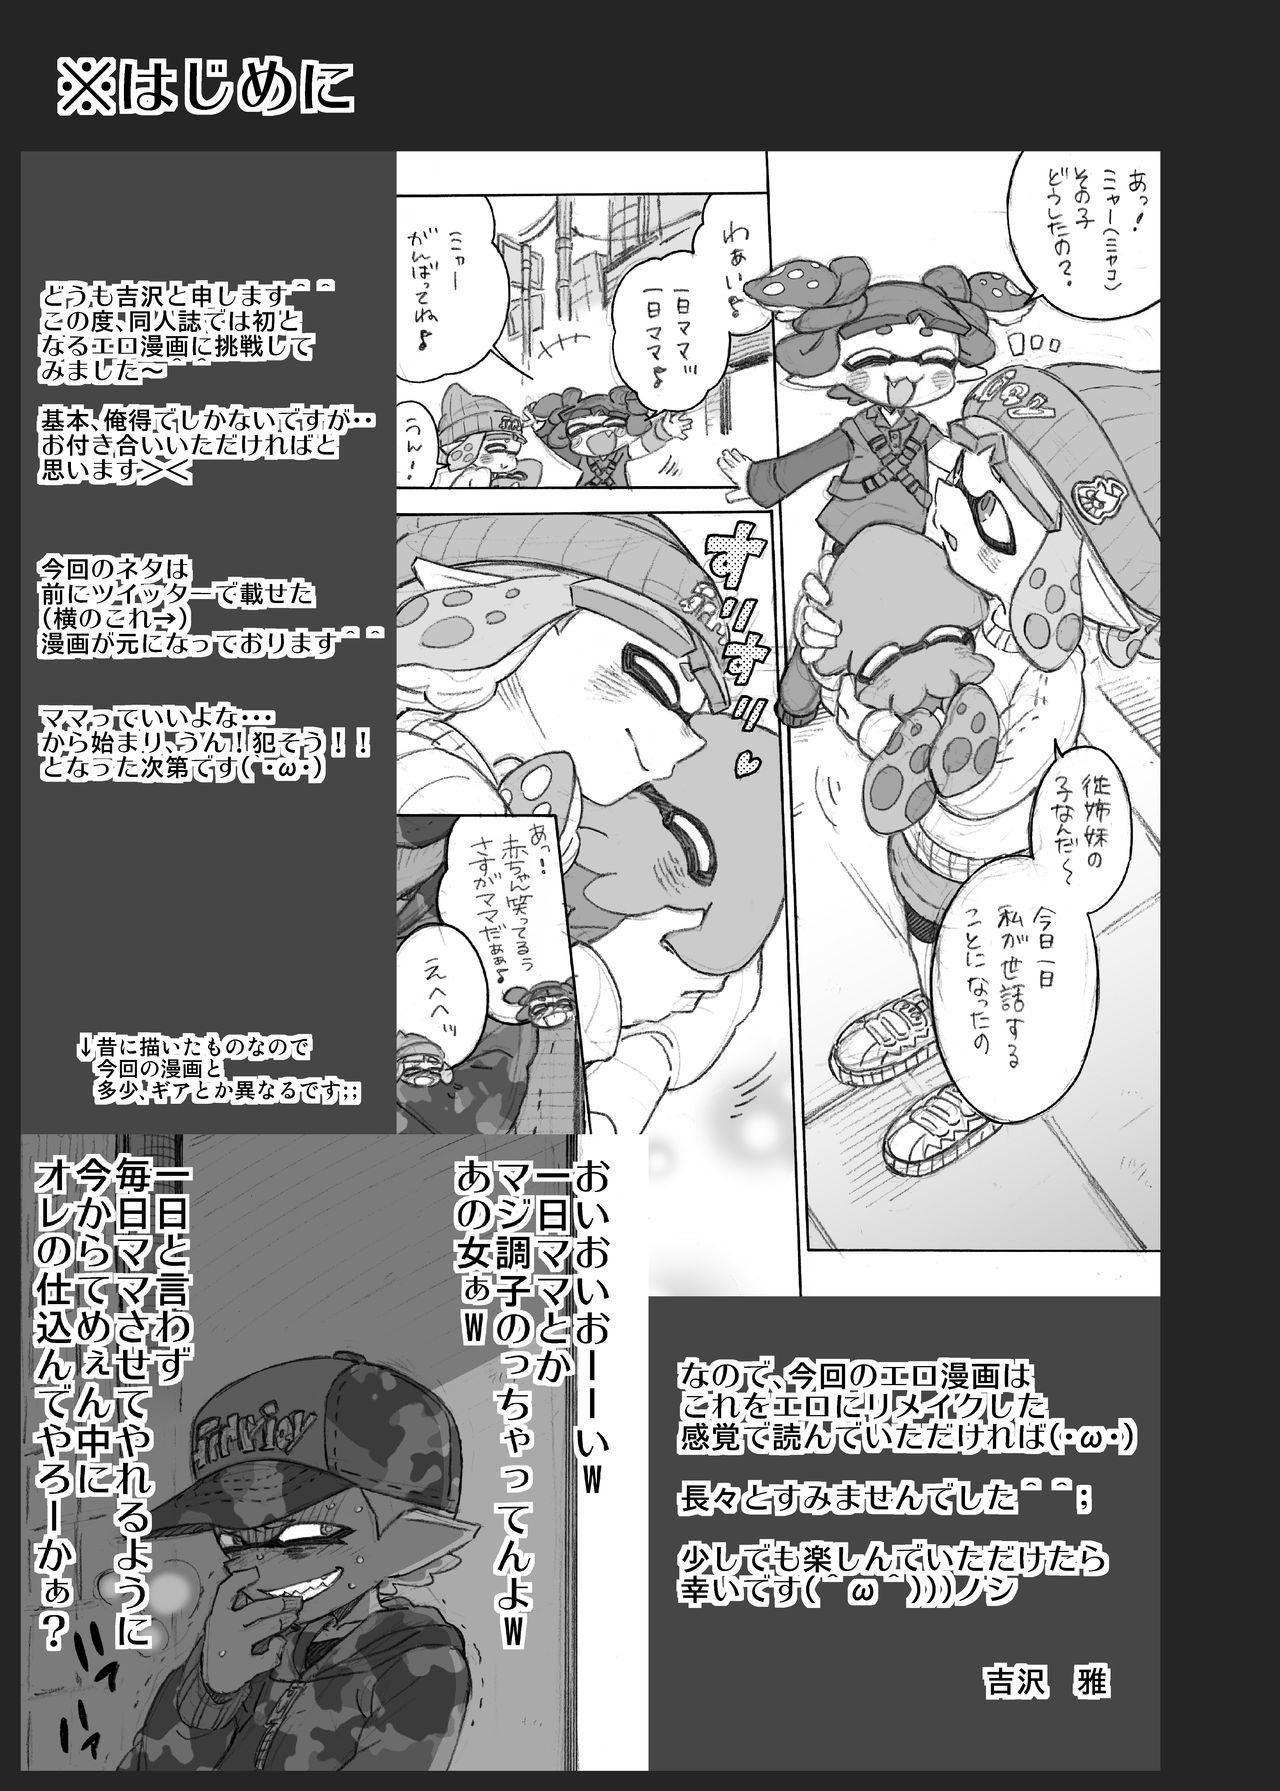 Small Tits Porn Let's make that anxious daughter a mama - Splatoon Free Amature - Page 2